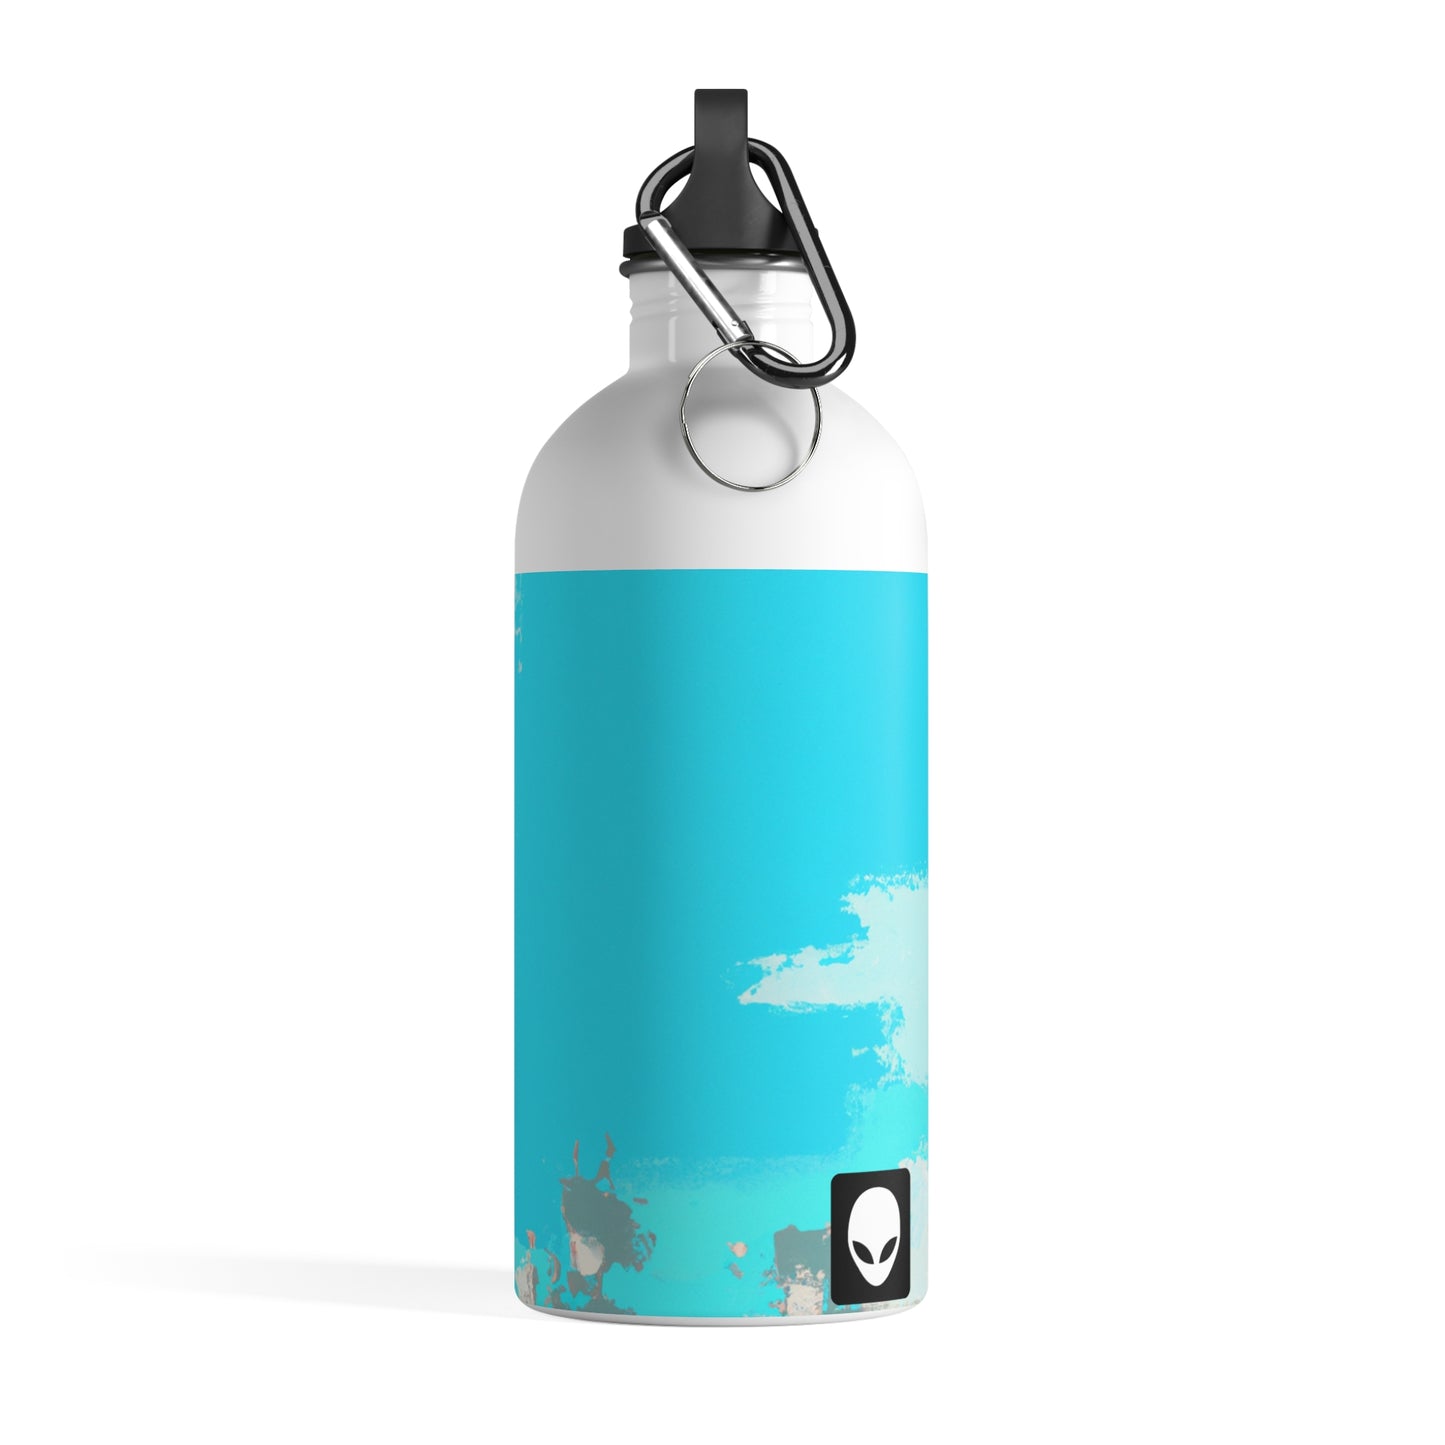 "A Breezy Skyscape: A Combination of Tradition and Modernity" - The Alien Stainless Steel Water Bottle